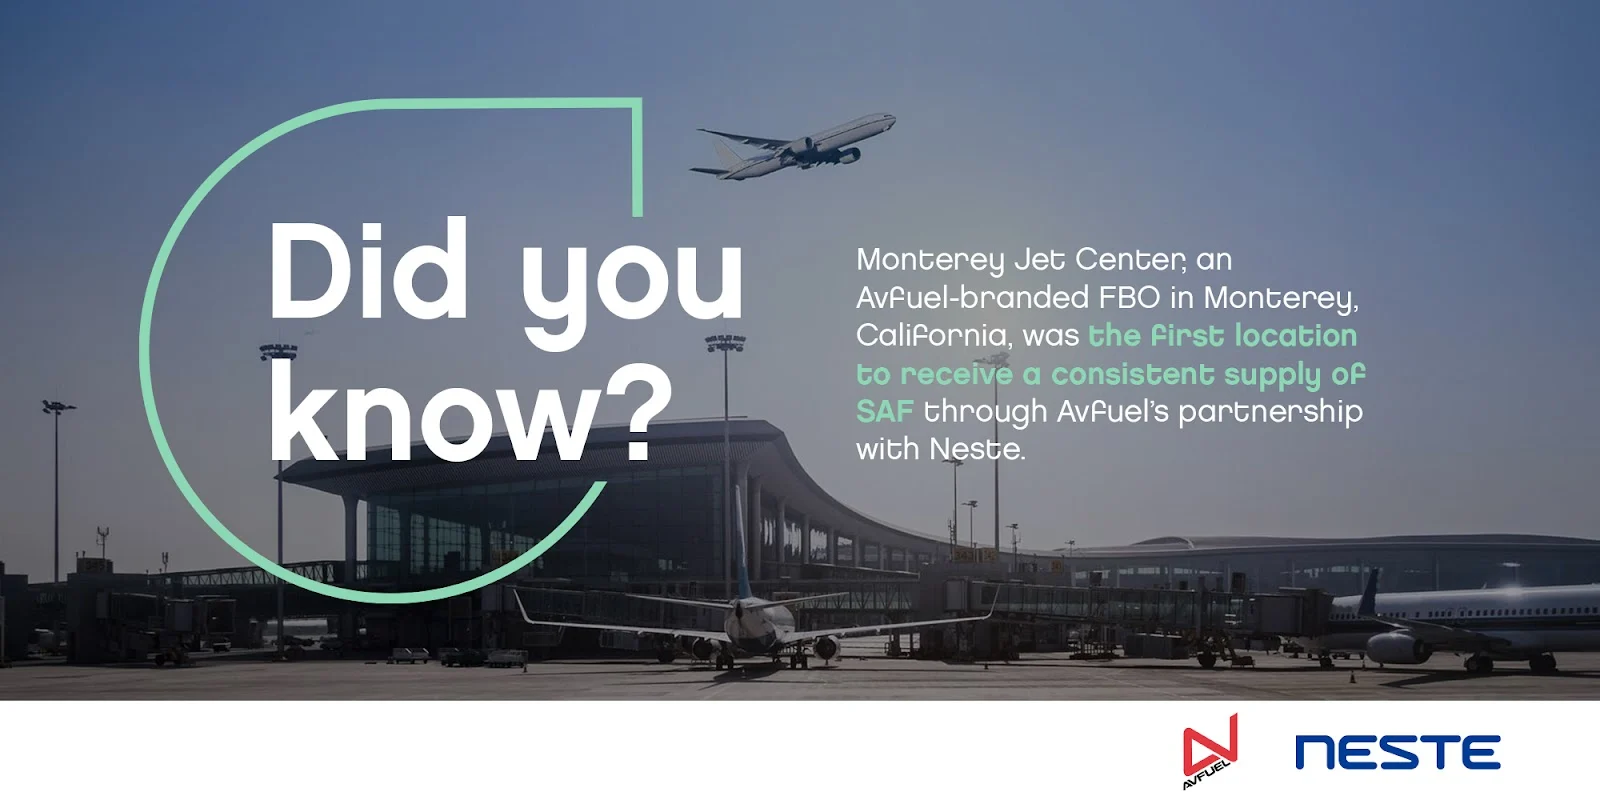 Information about the Monterey Jet Center and Avfuel